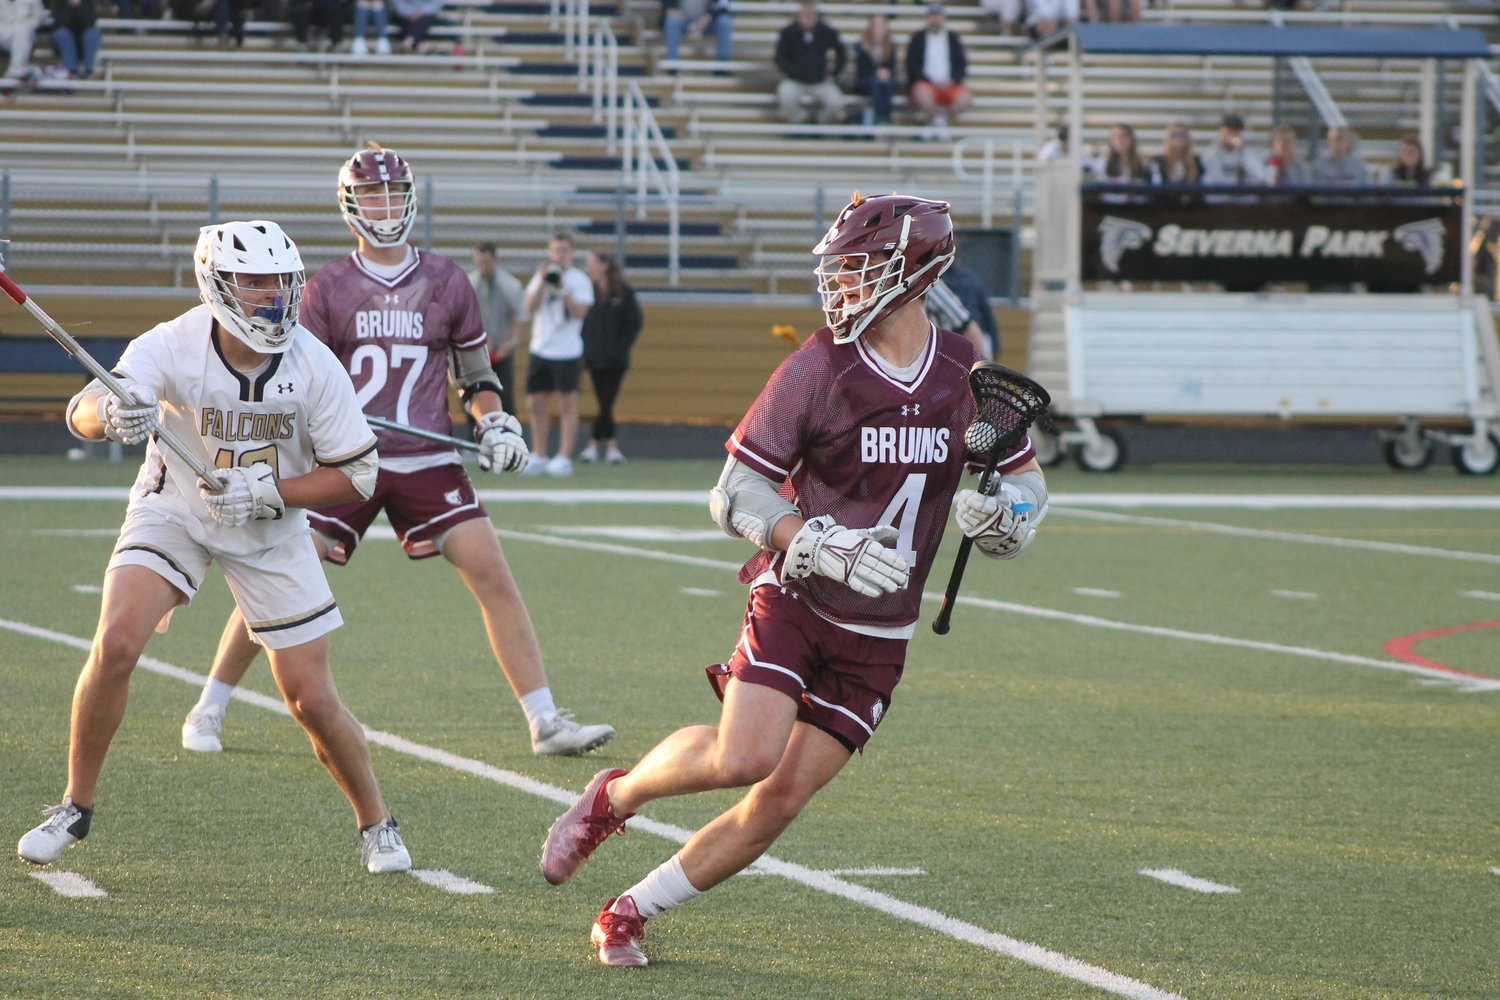 Broadneck’s Ryan Della looked to pass the ball after Falcons defender Brayden Flynn (left) closed off his shooting lane.